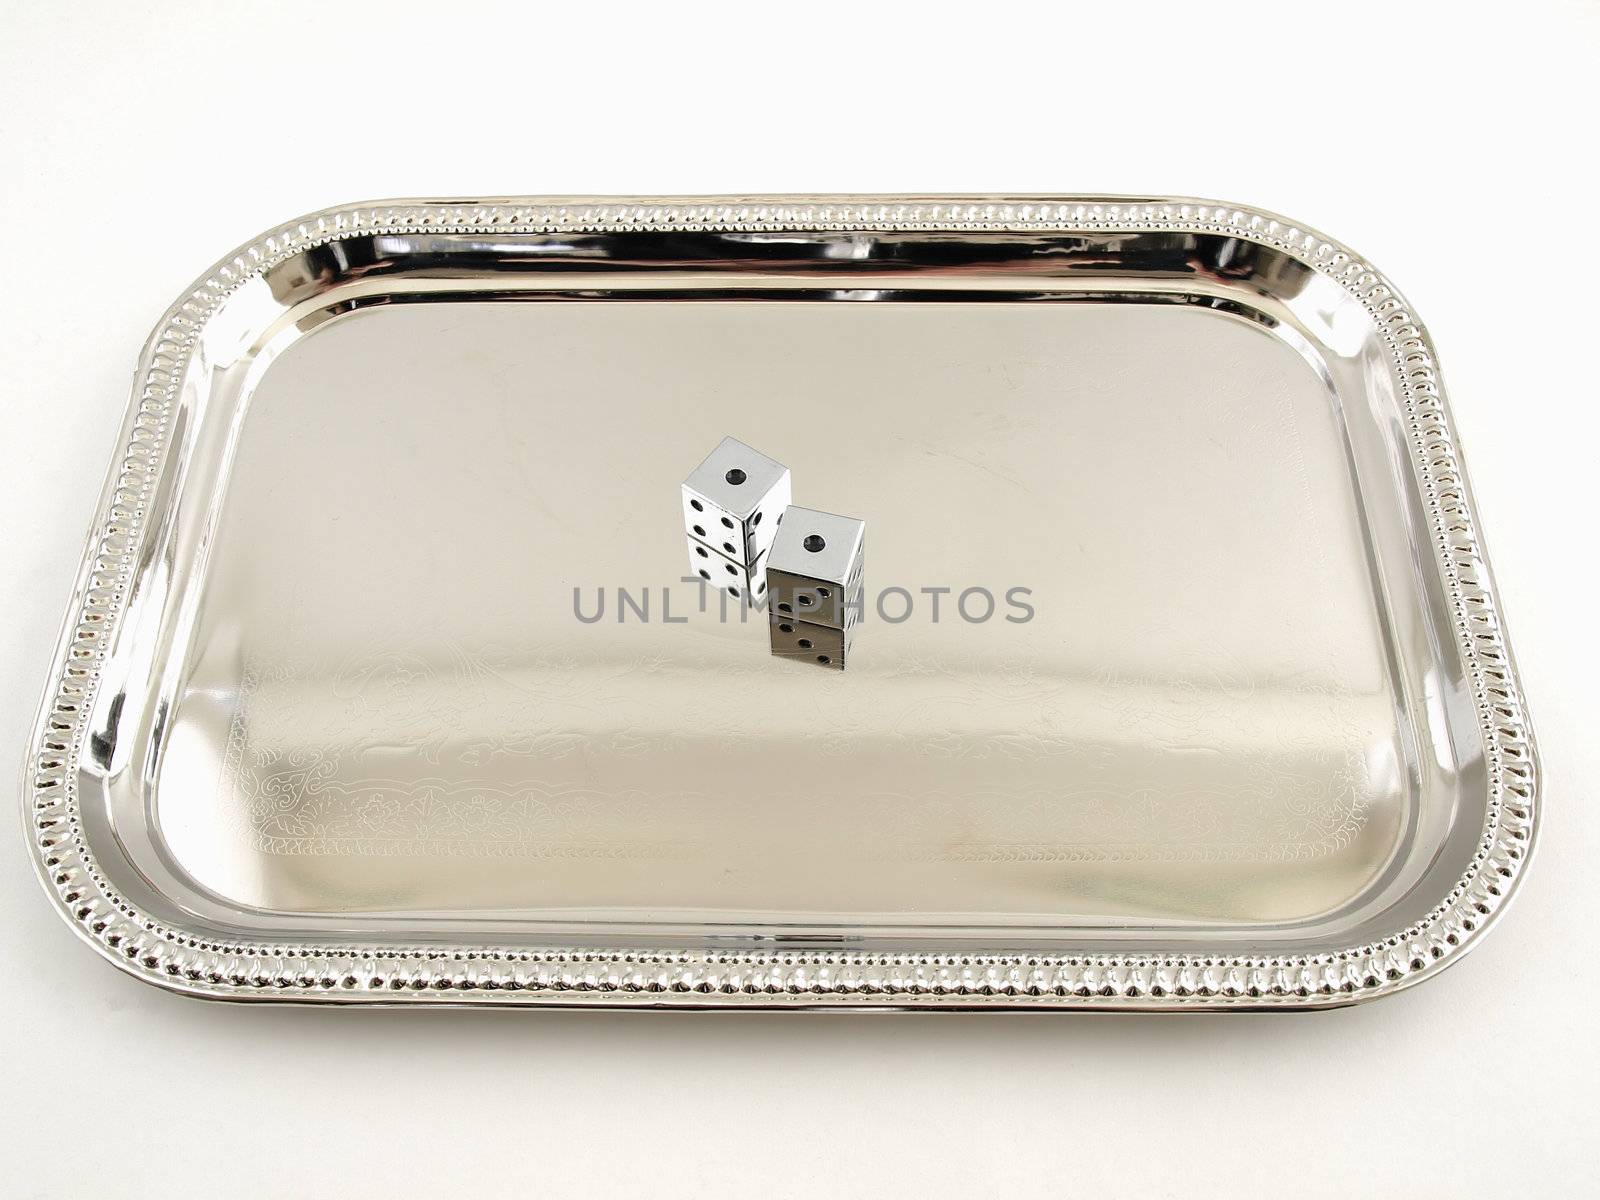 Two silver dice sitting on a Silver tray isolated on a white background